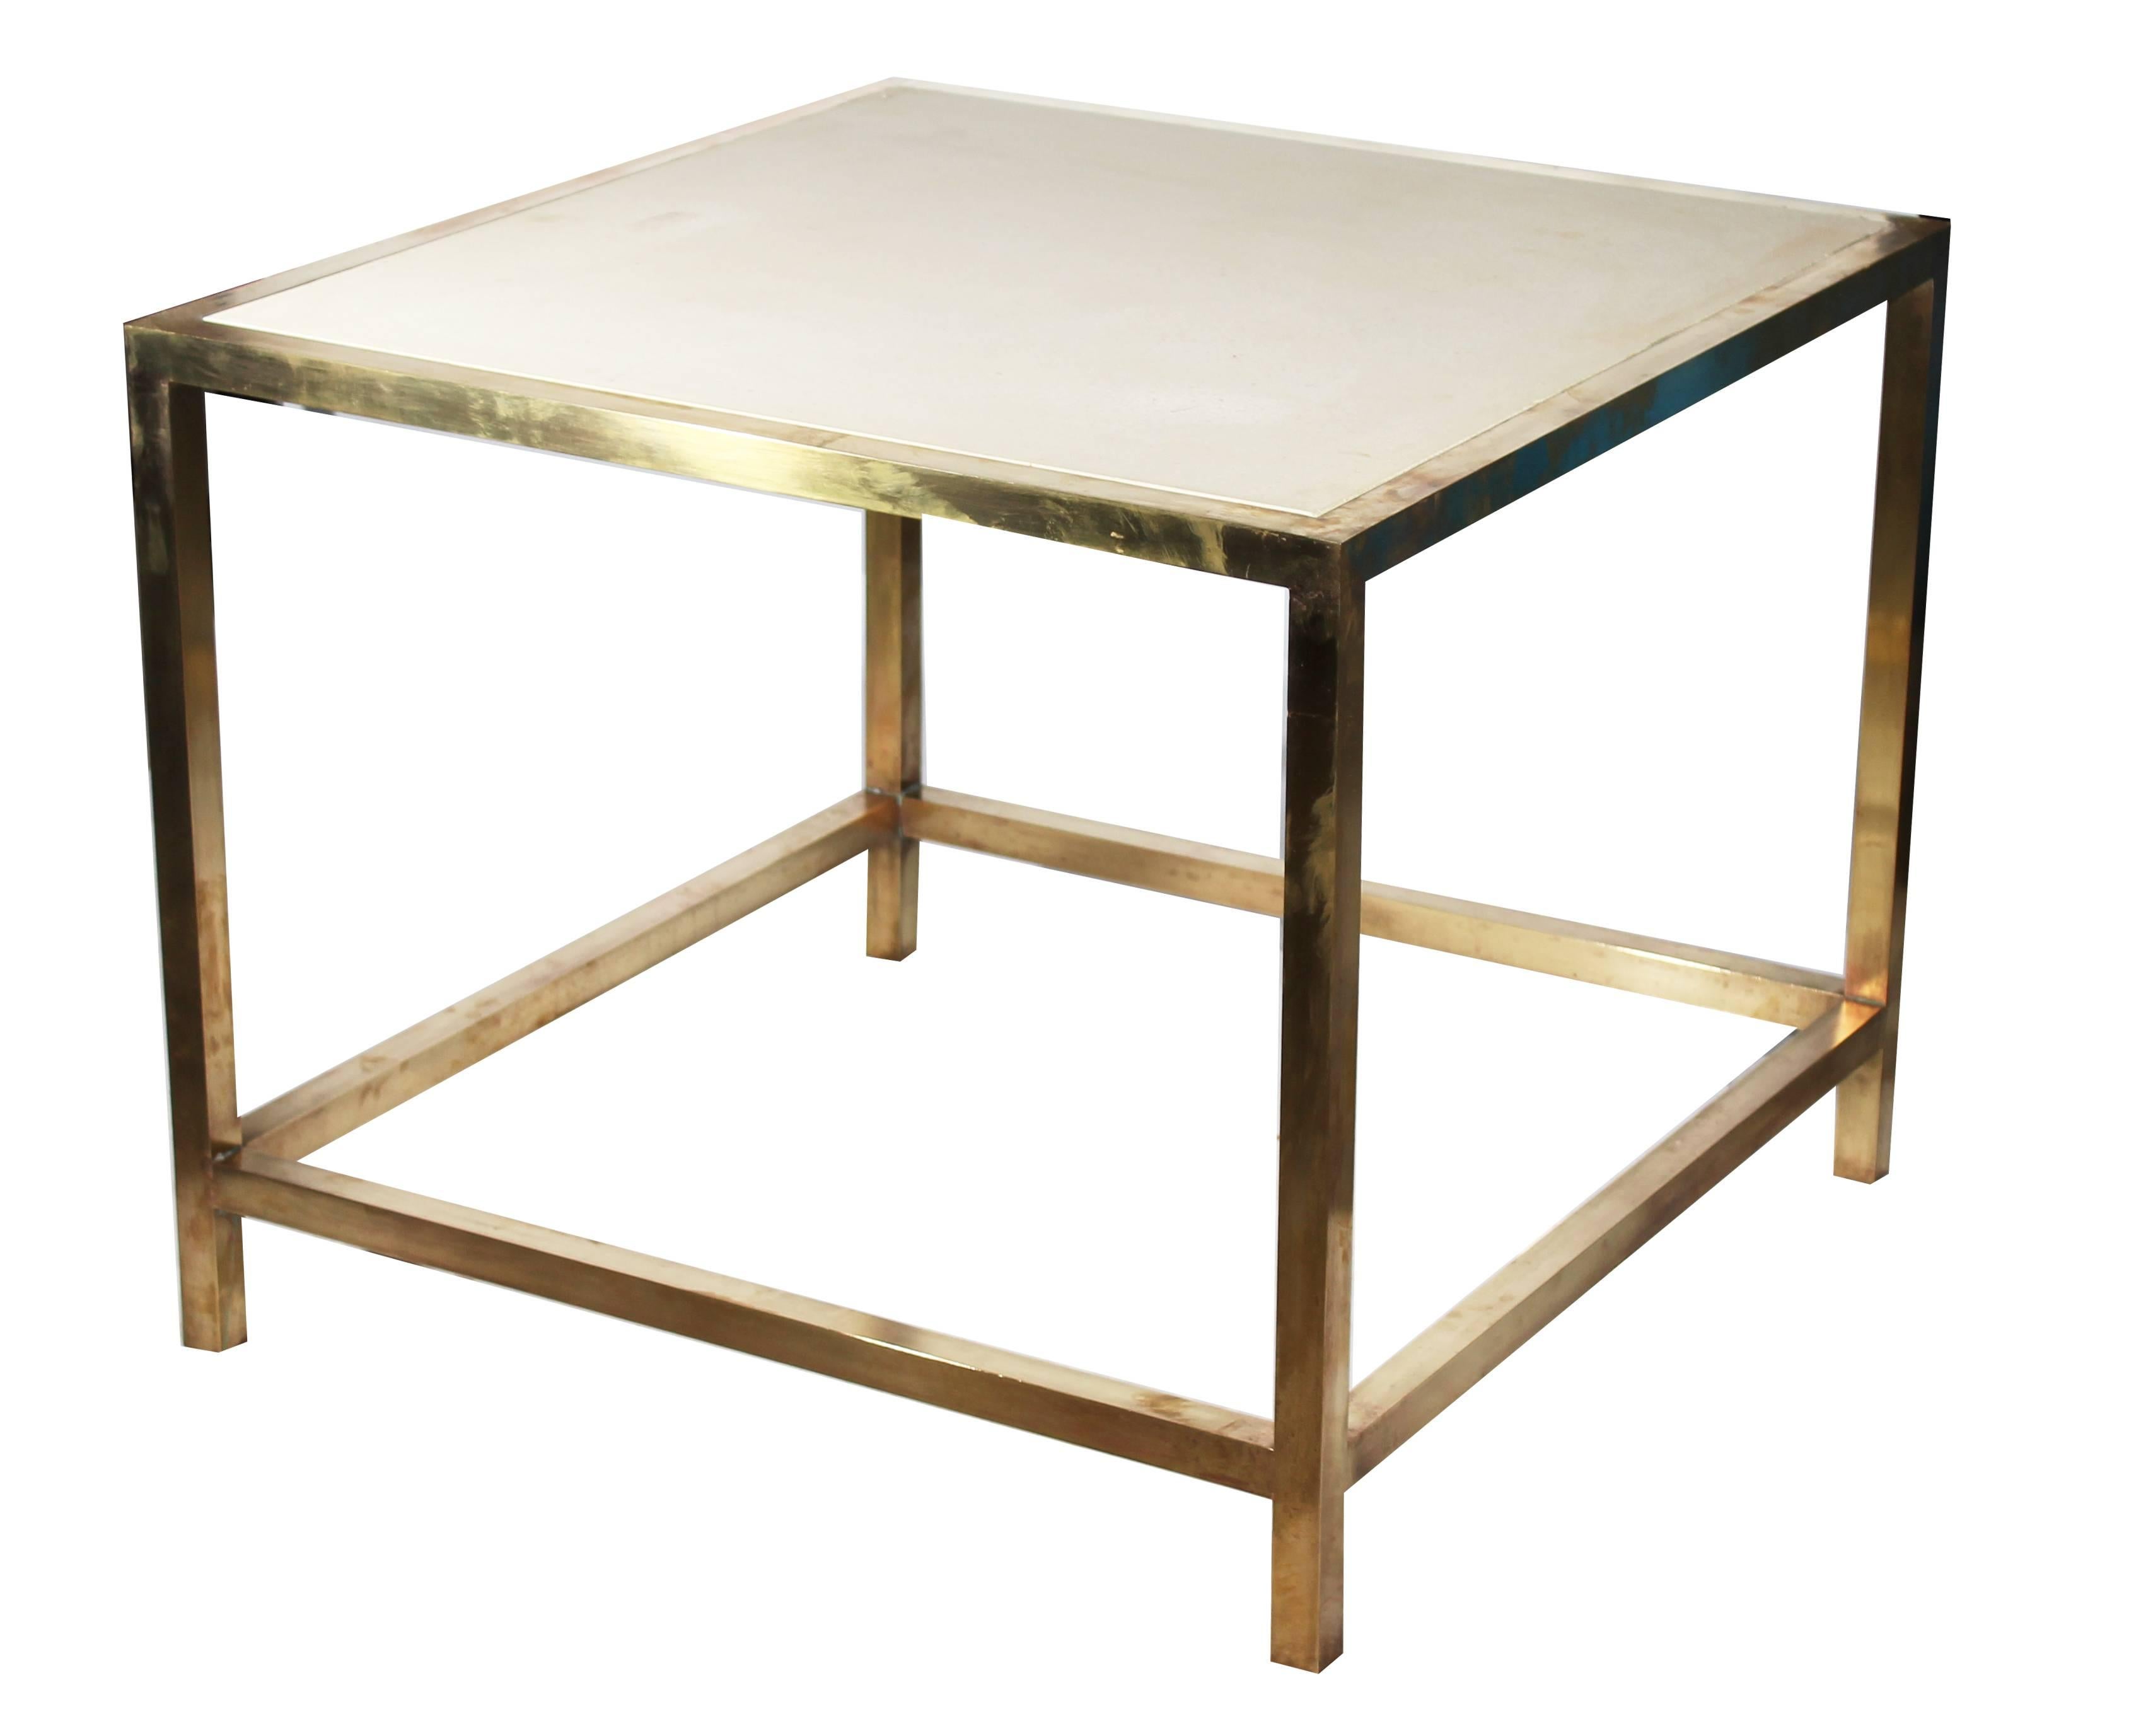 1980s gilded brass straight lined Italian design side table with white natural stone top.